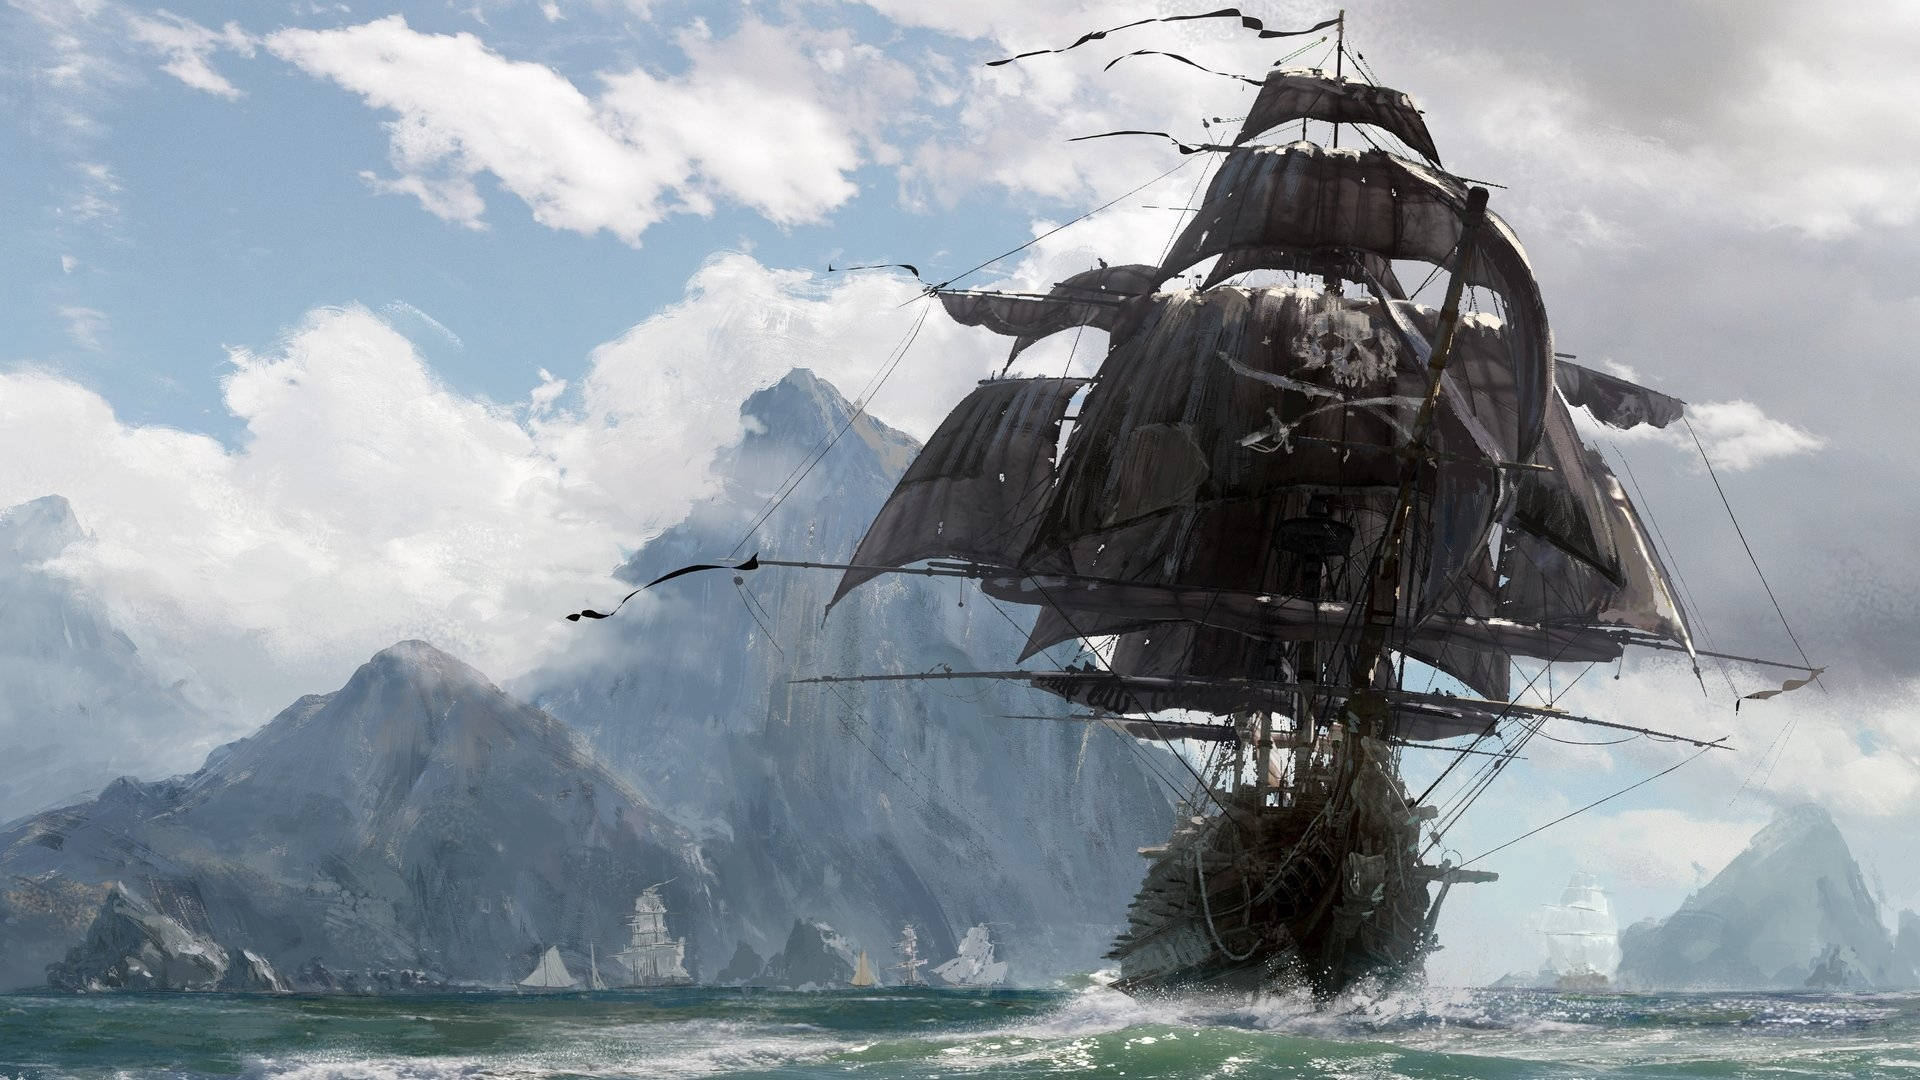 Pirate Ship Wallpaper Images